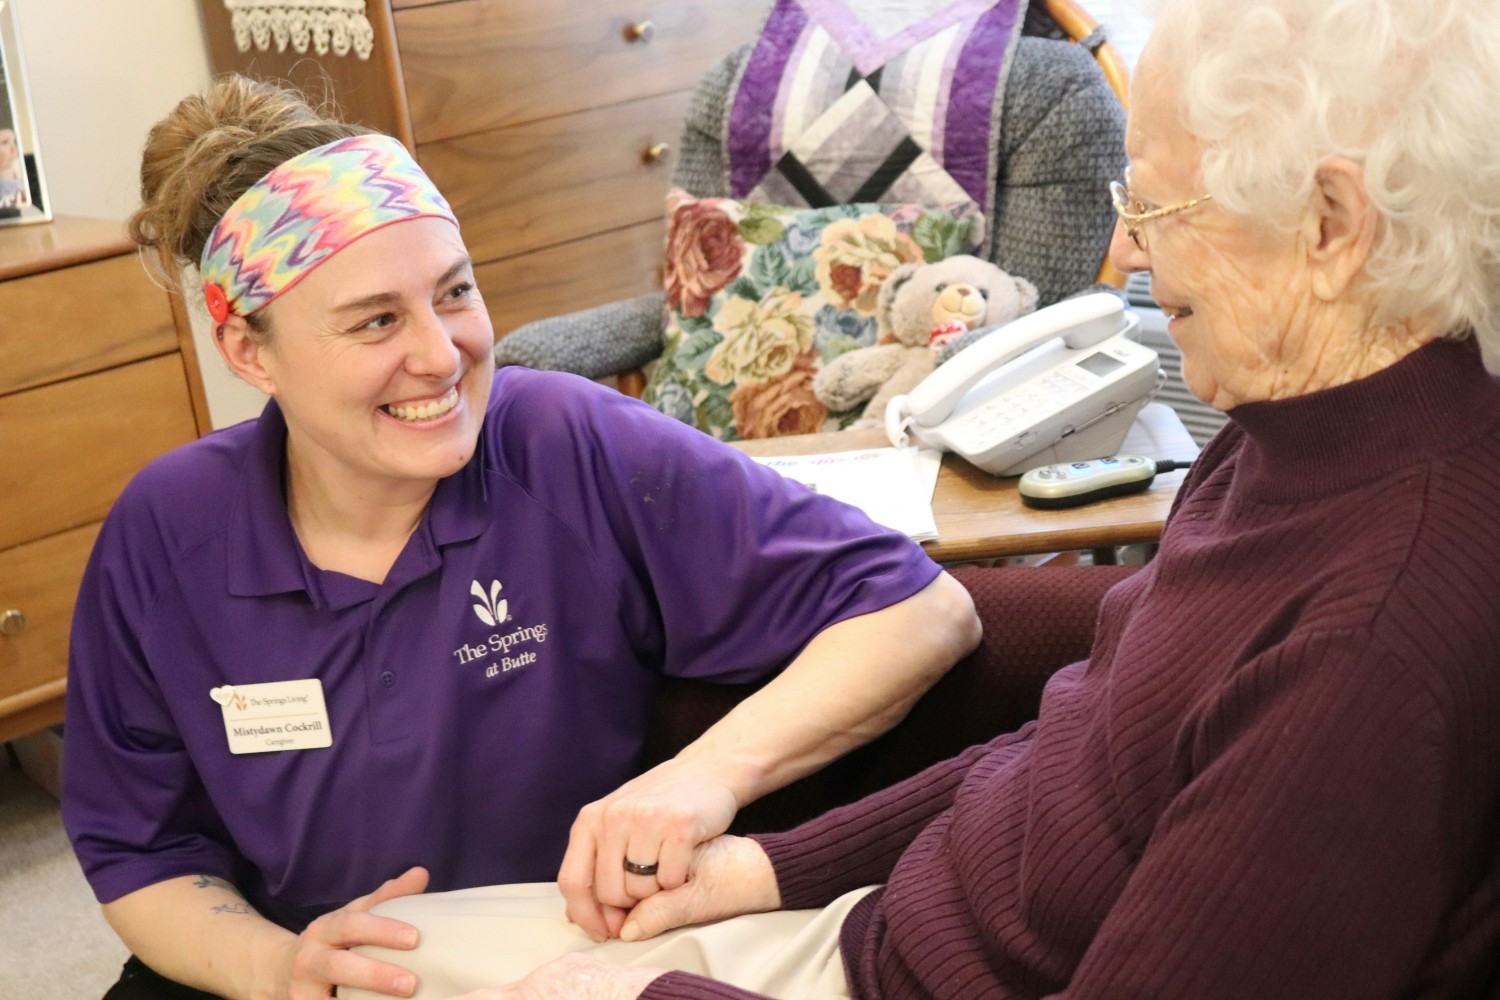 We strive to be the best place for caring people to work.